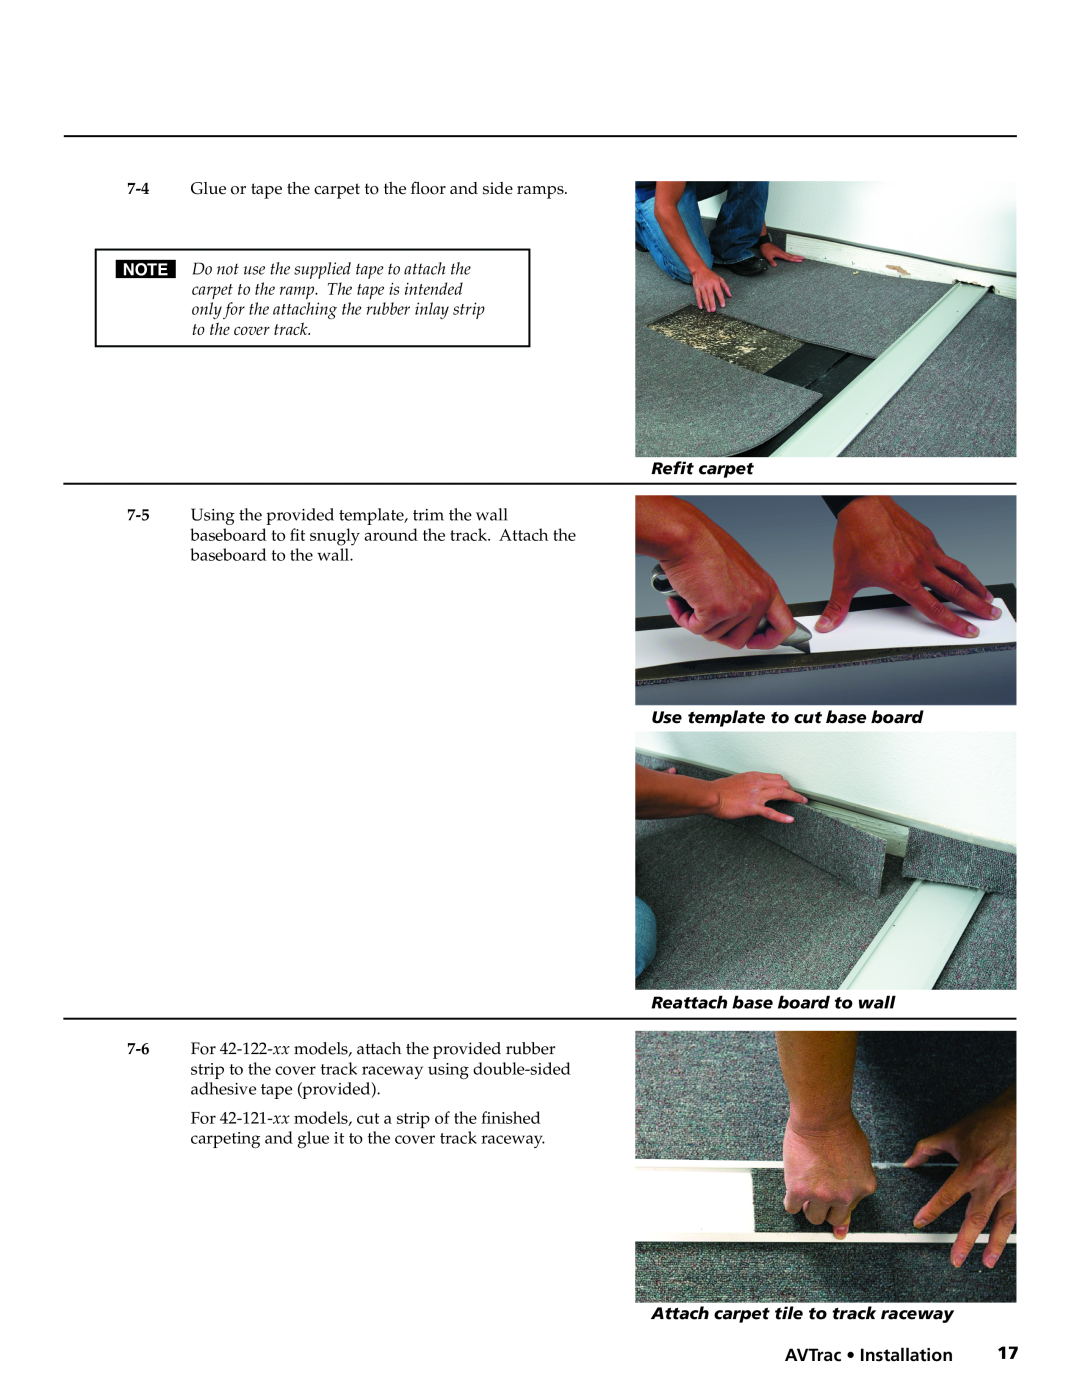 Extron electronic 42-122-xx Refit carpet, Use template to cut base board Reattach base board to wall, AVTrac Installation 